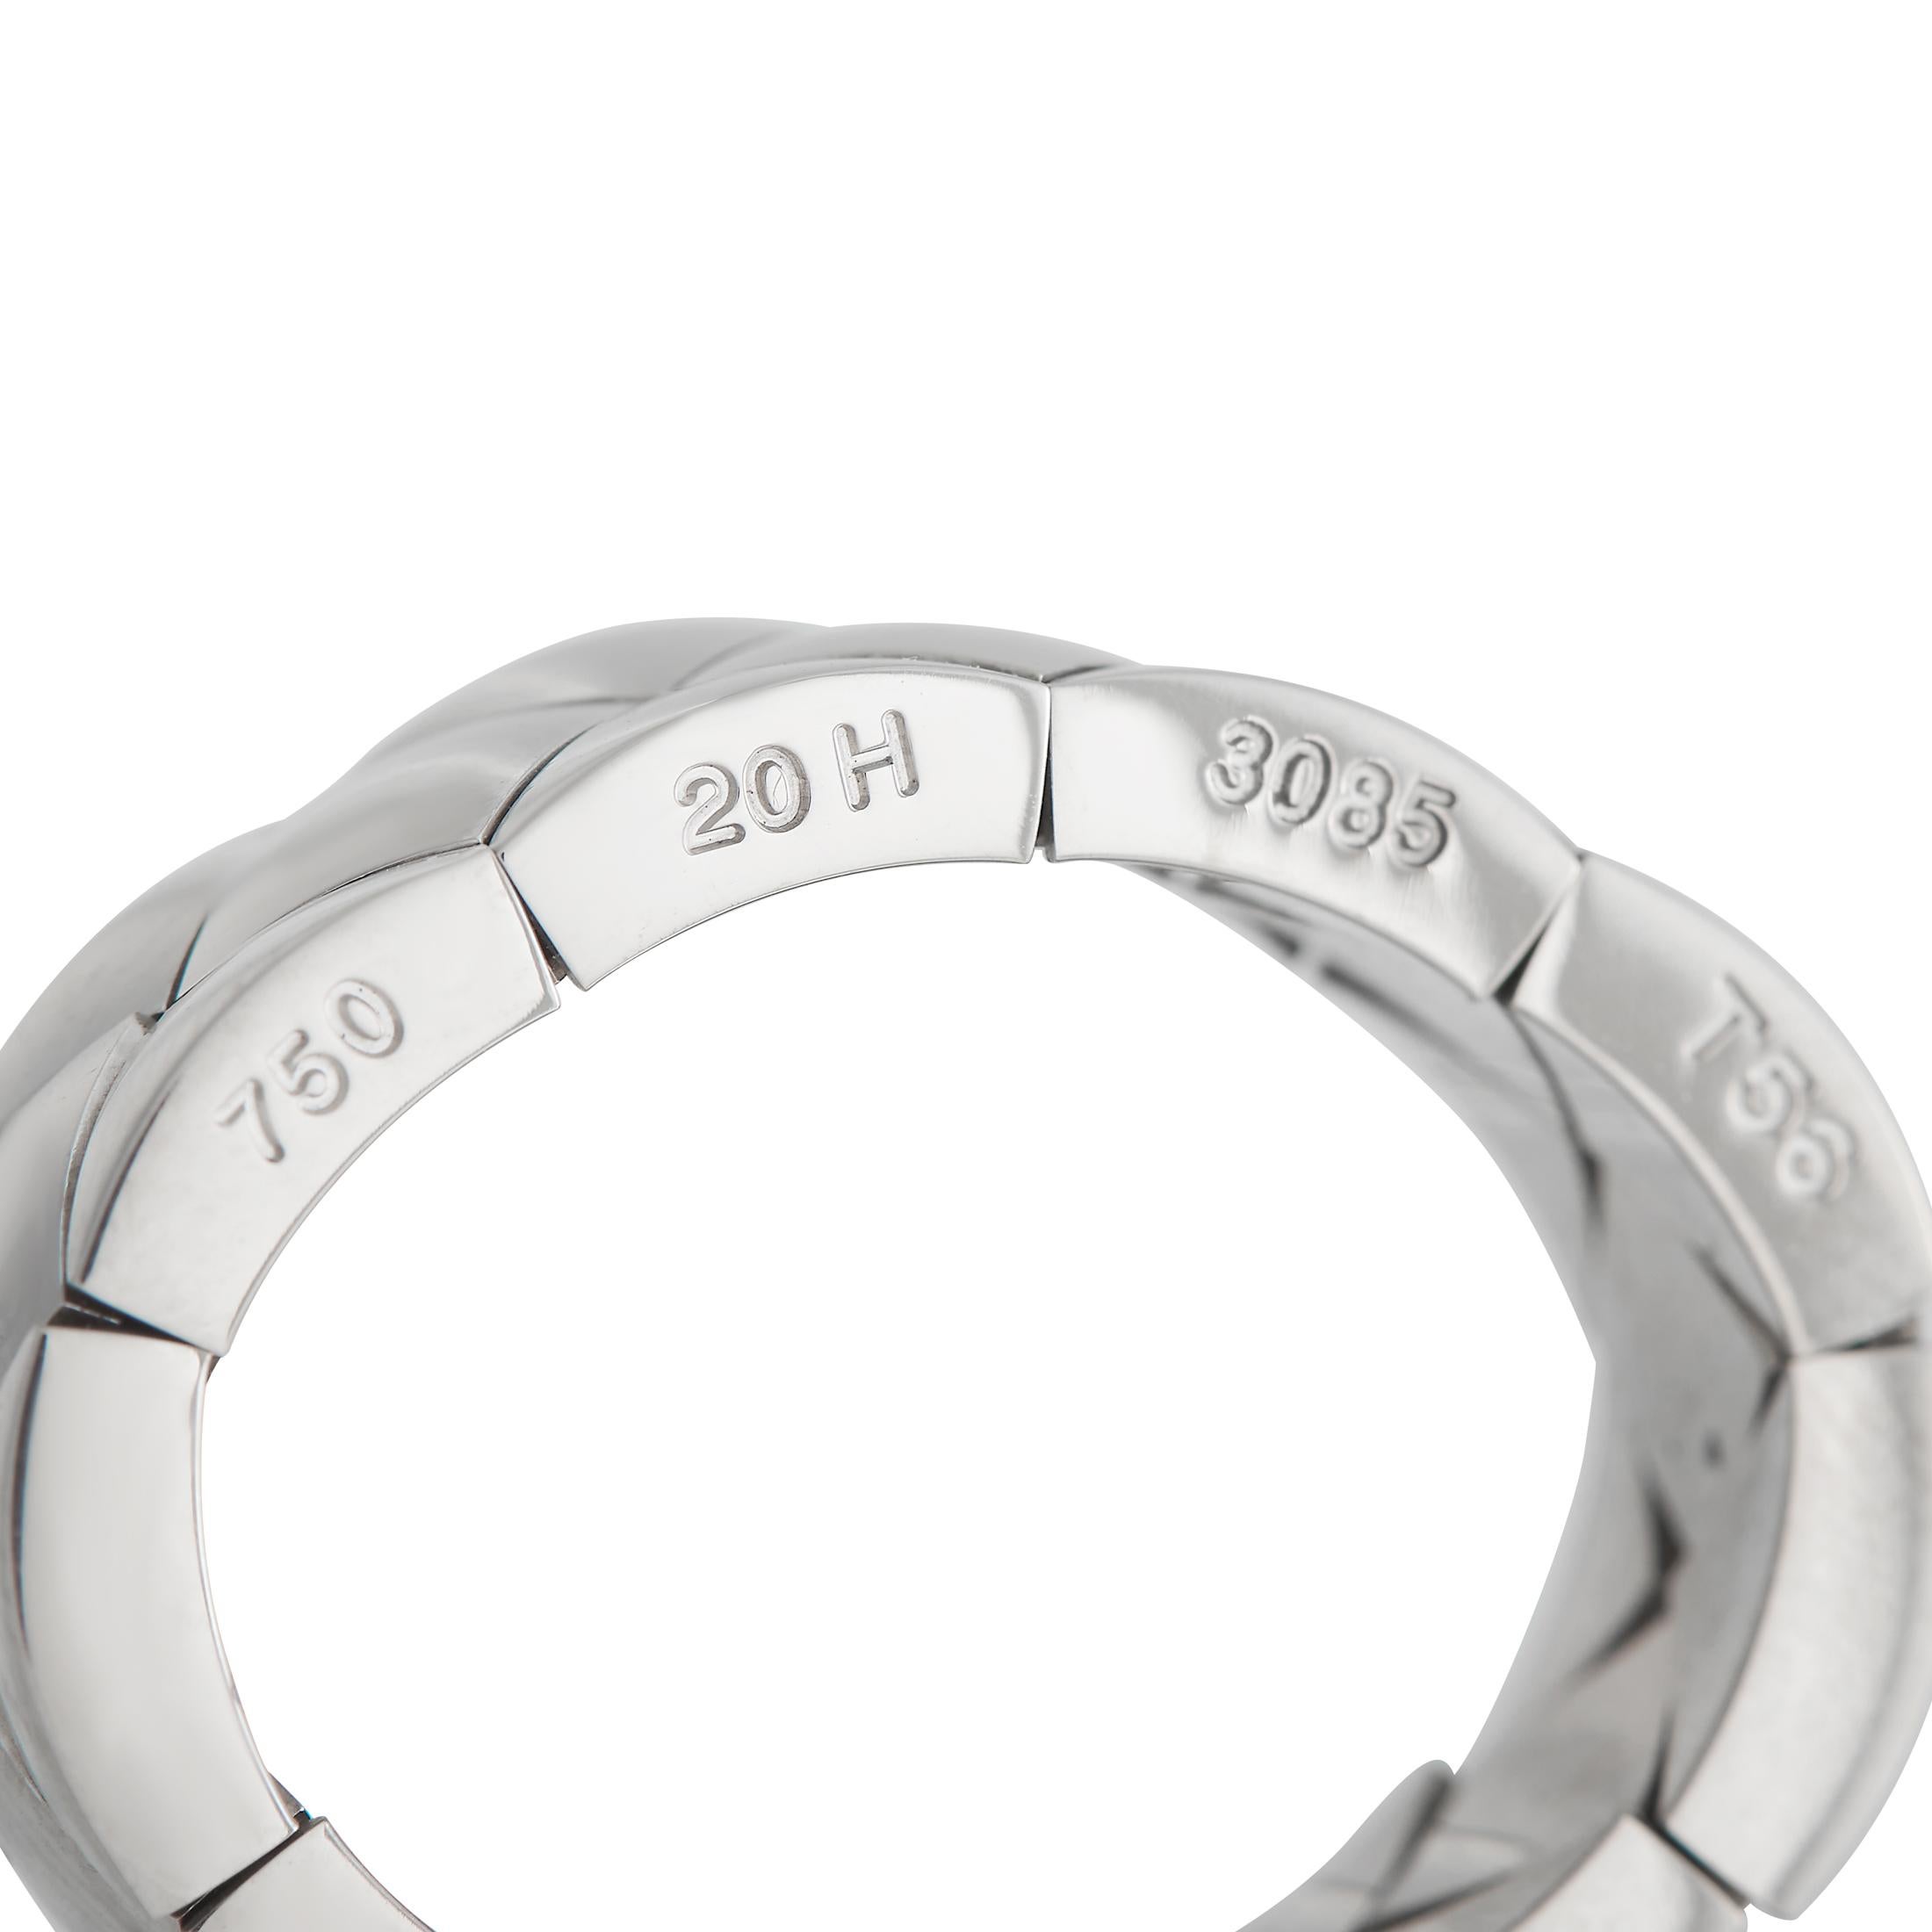 chanel ring band